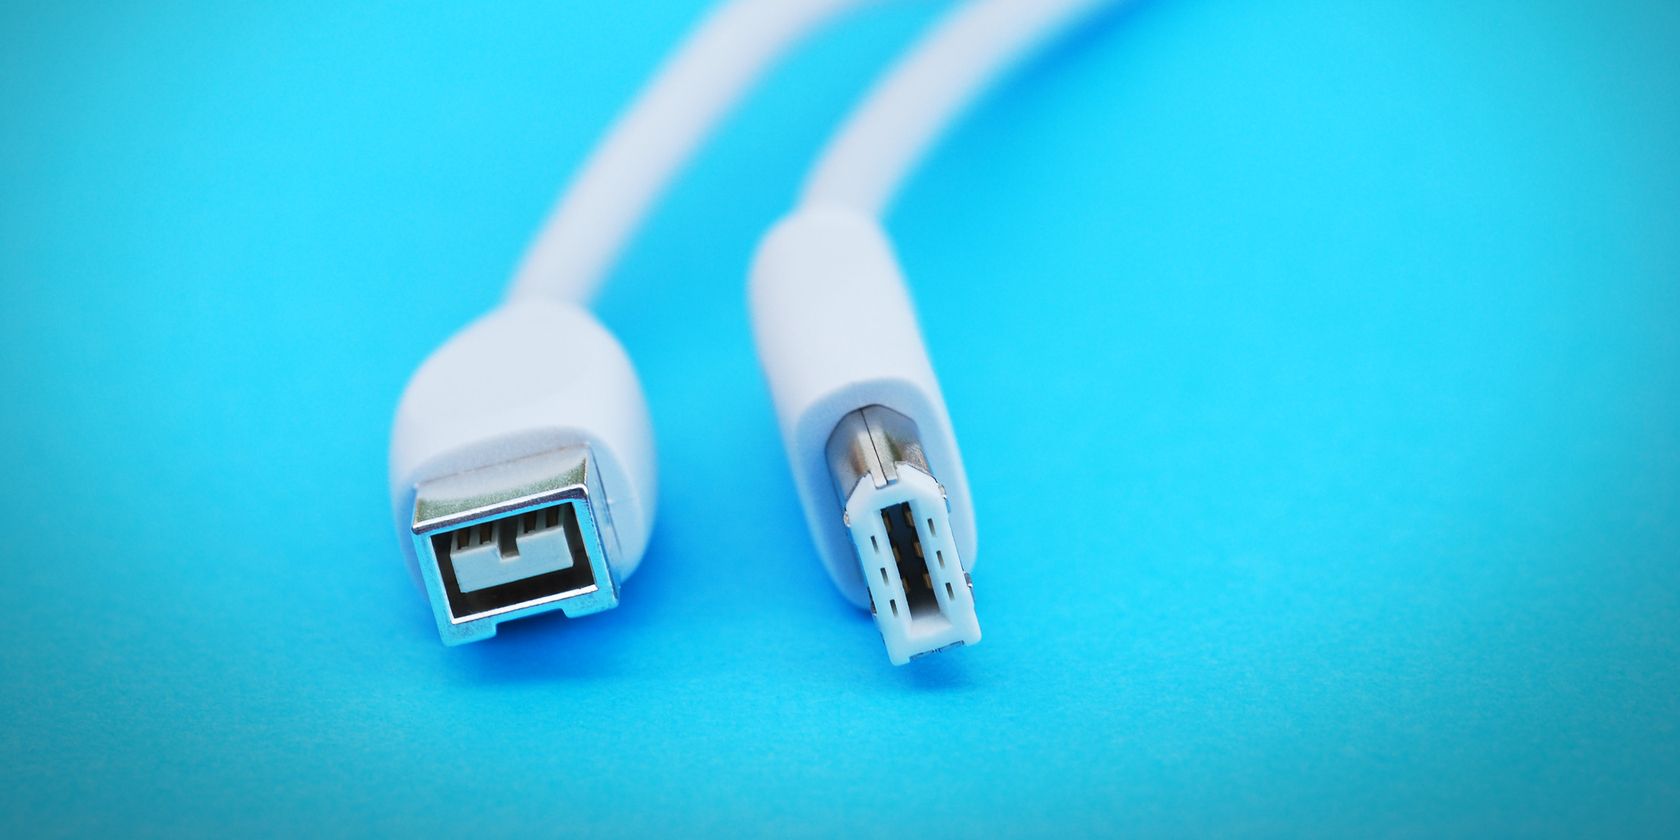 firewire cable on blue background feature image